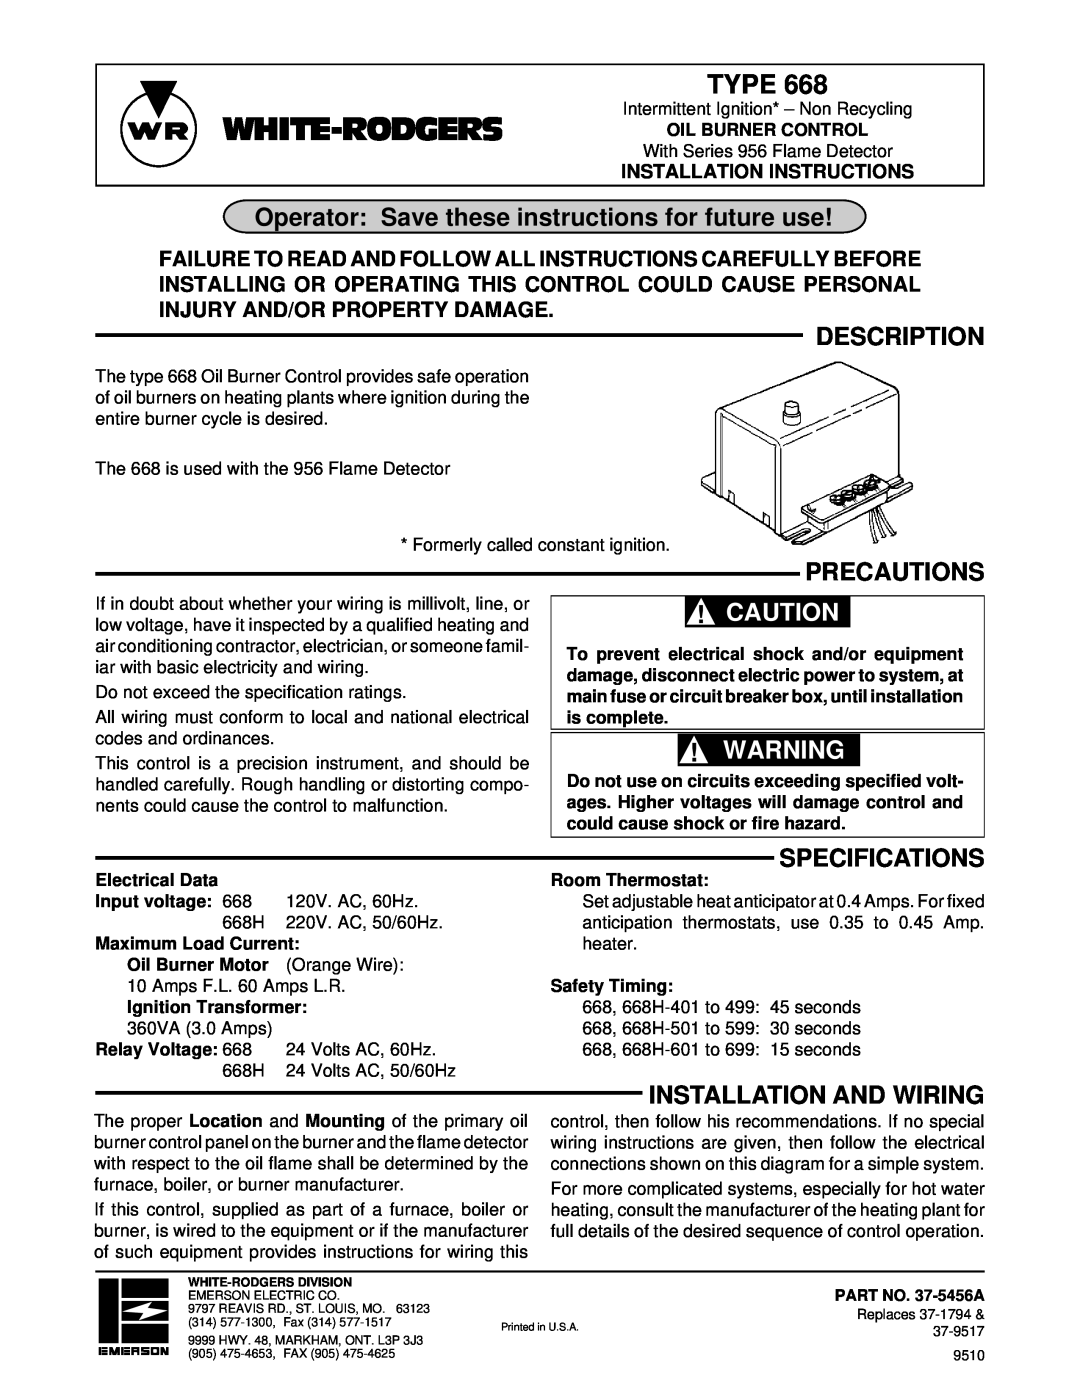 White Rodgers 668 installation instructions White-Rodgers, Operator Save these instructions for future use, Description 